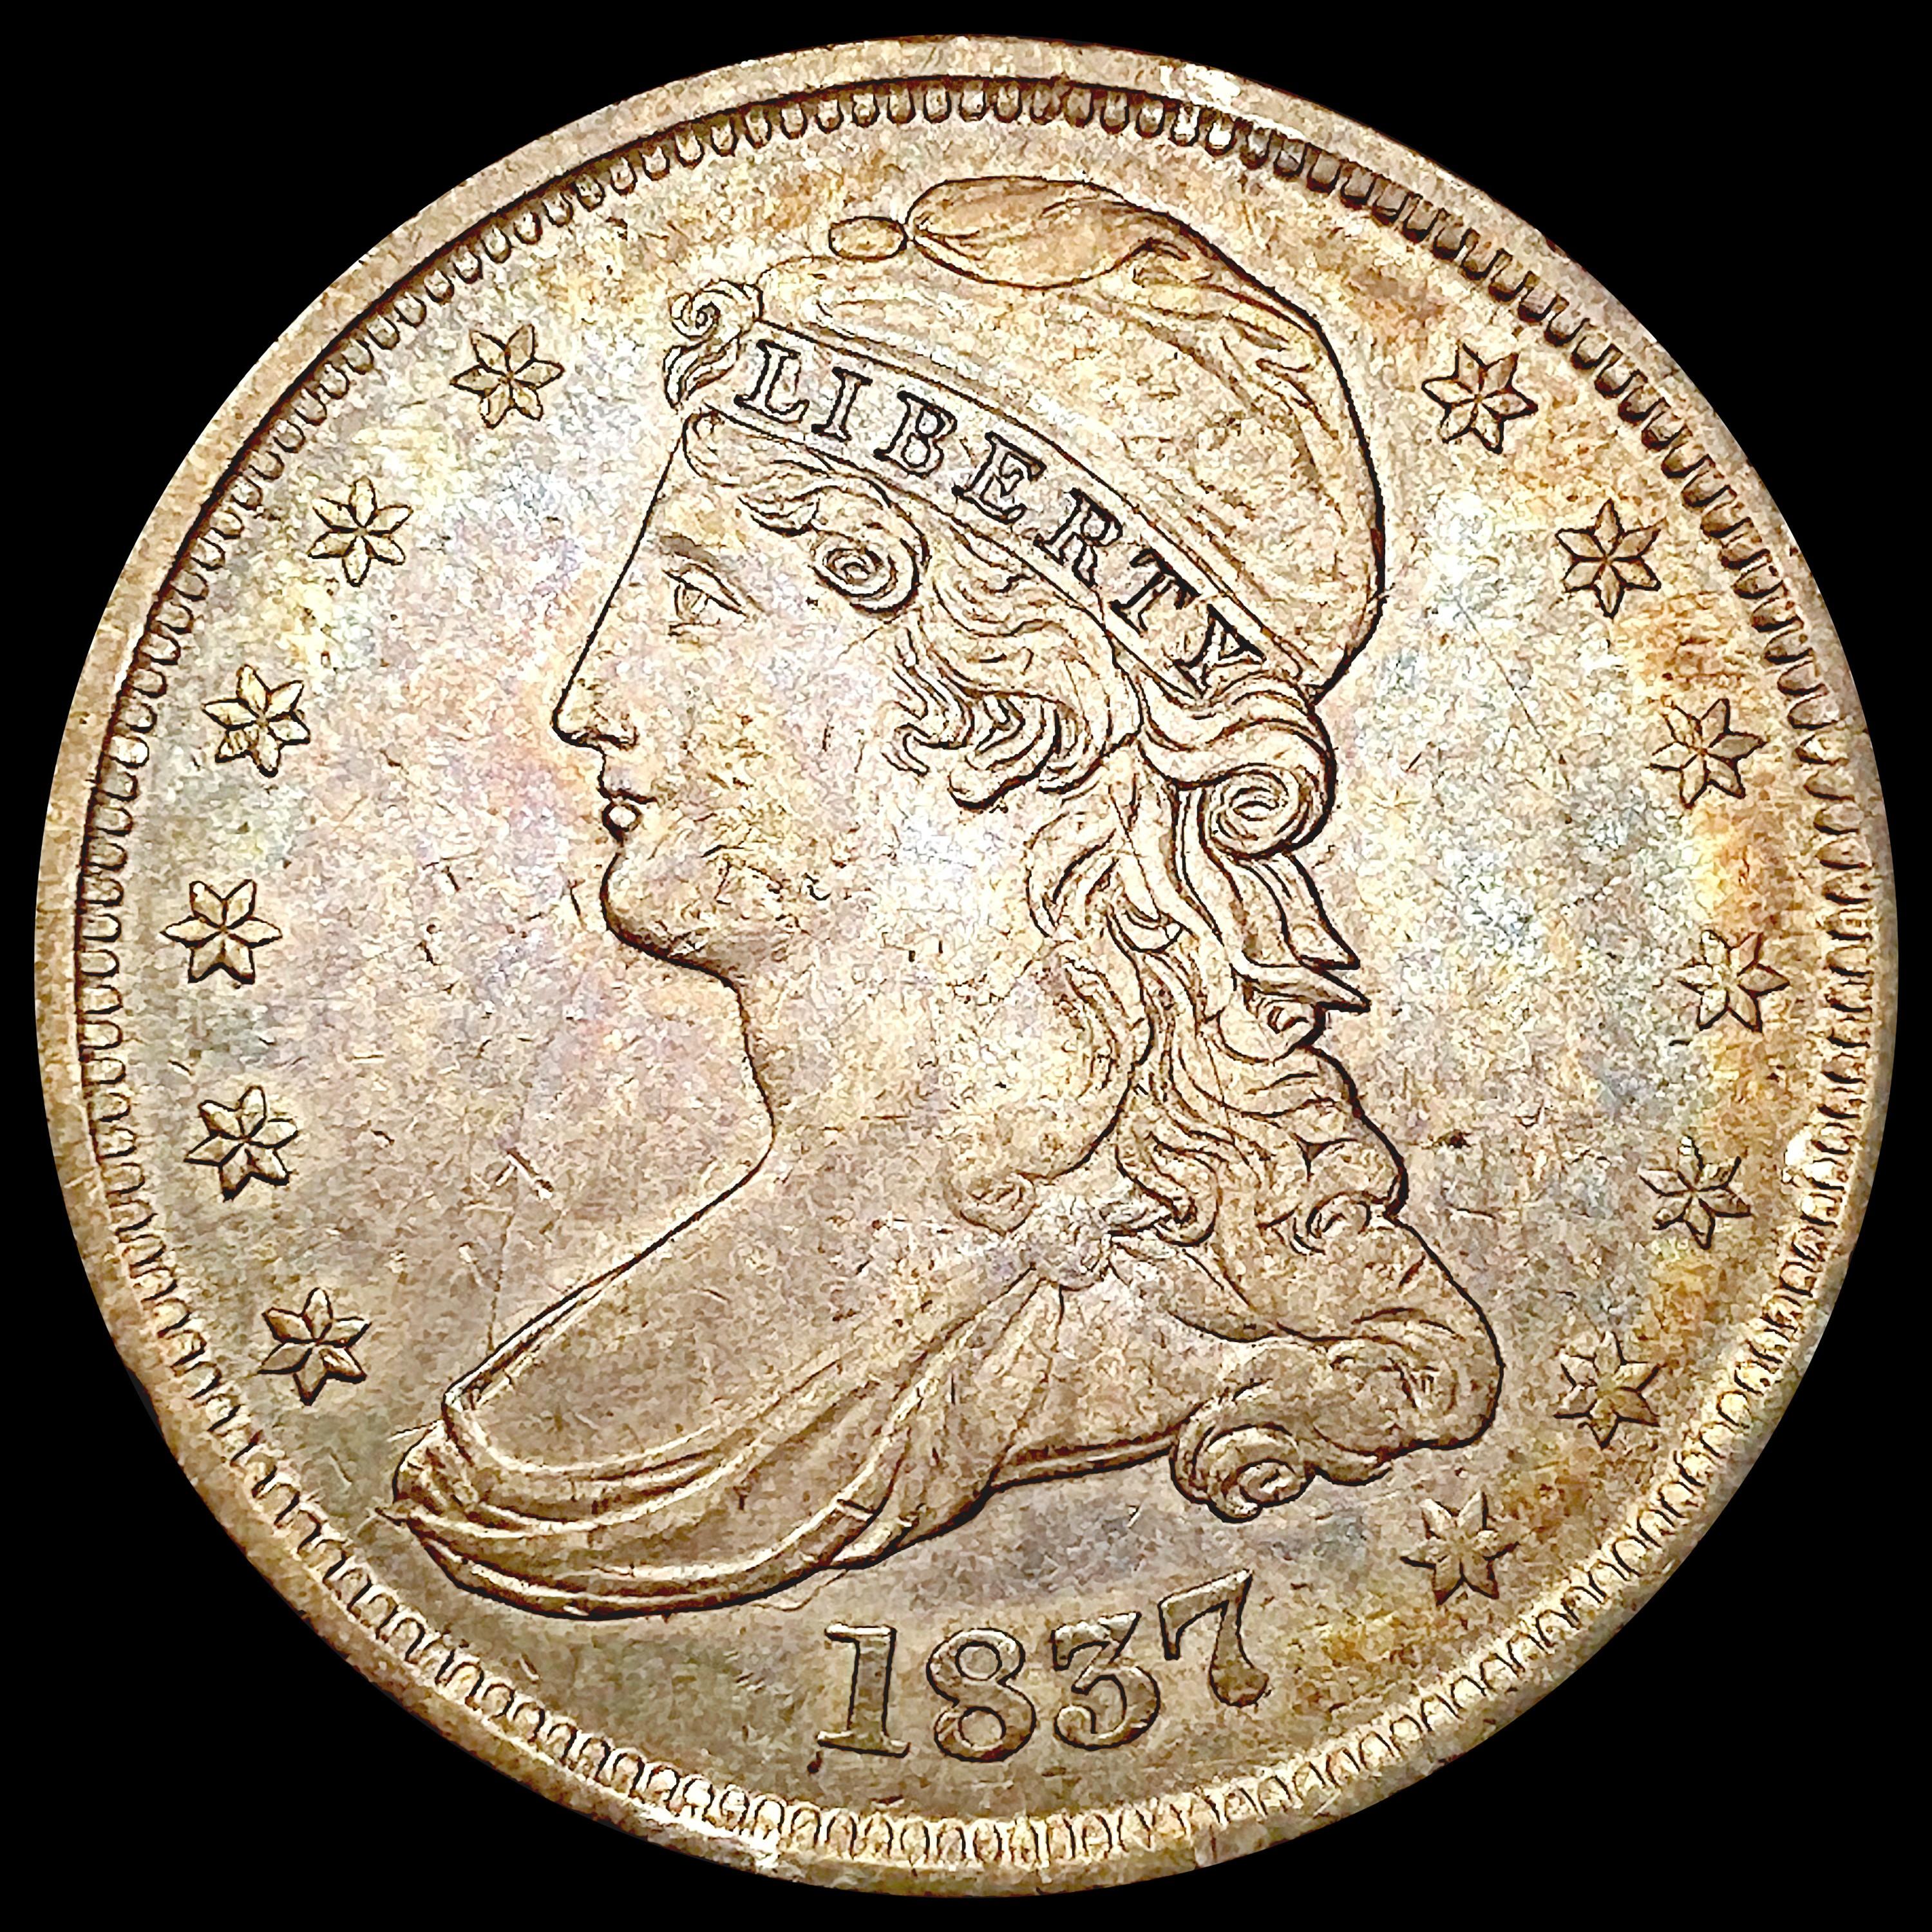 1837 Capped Bust Half Dollar NEARLY UNCIRCULATED